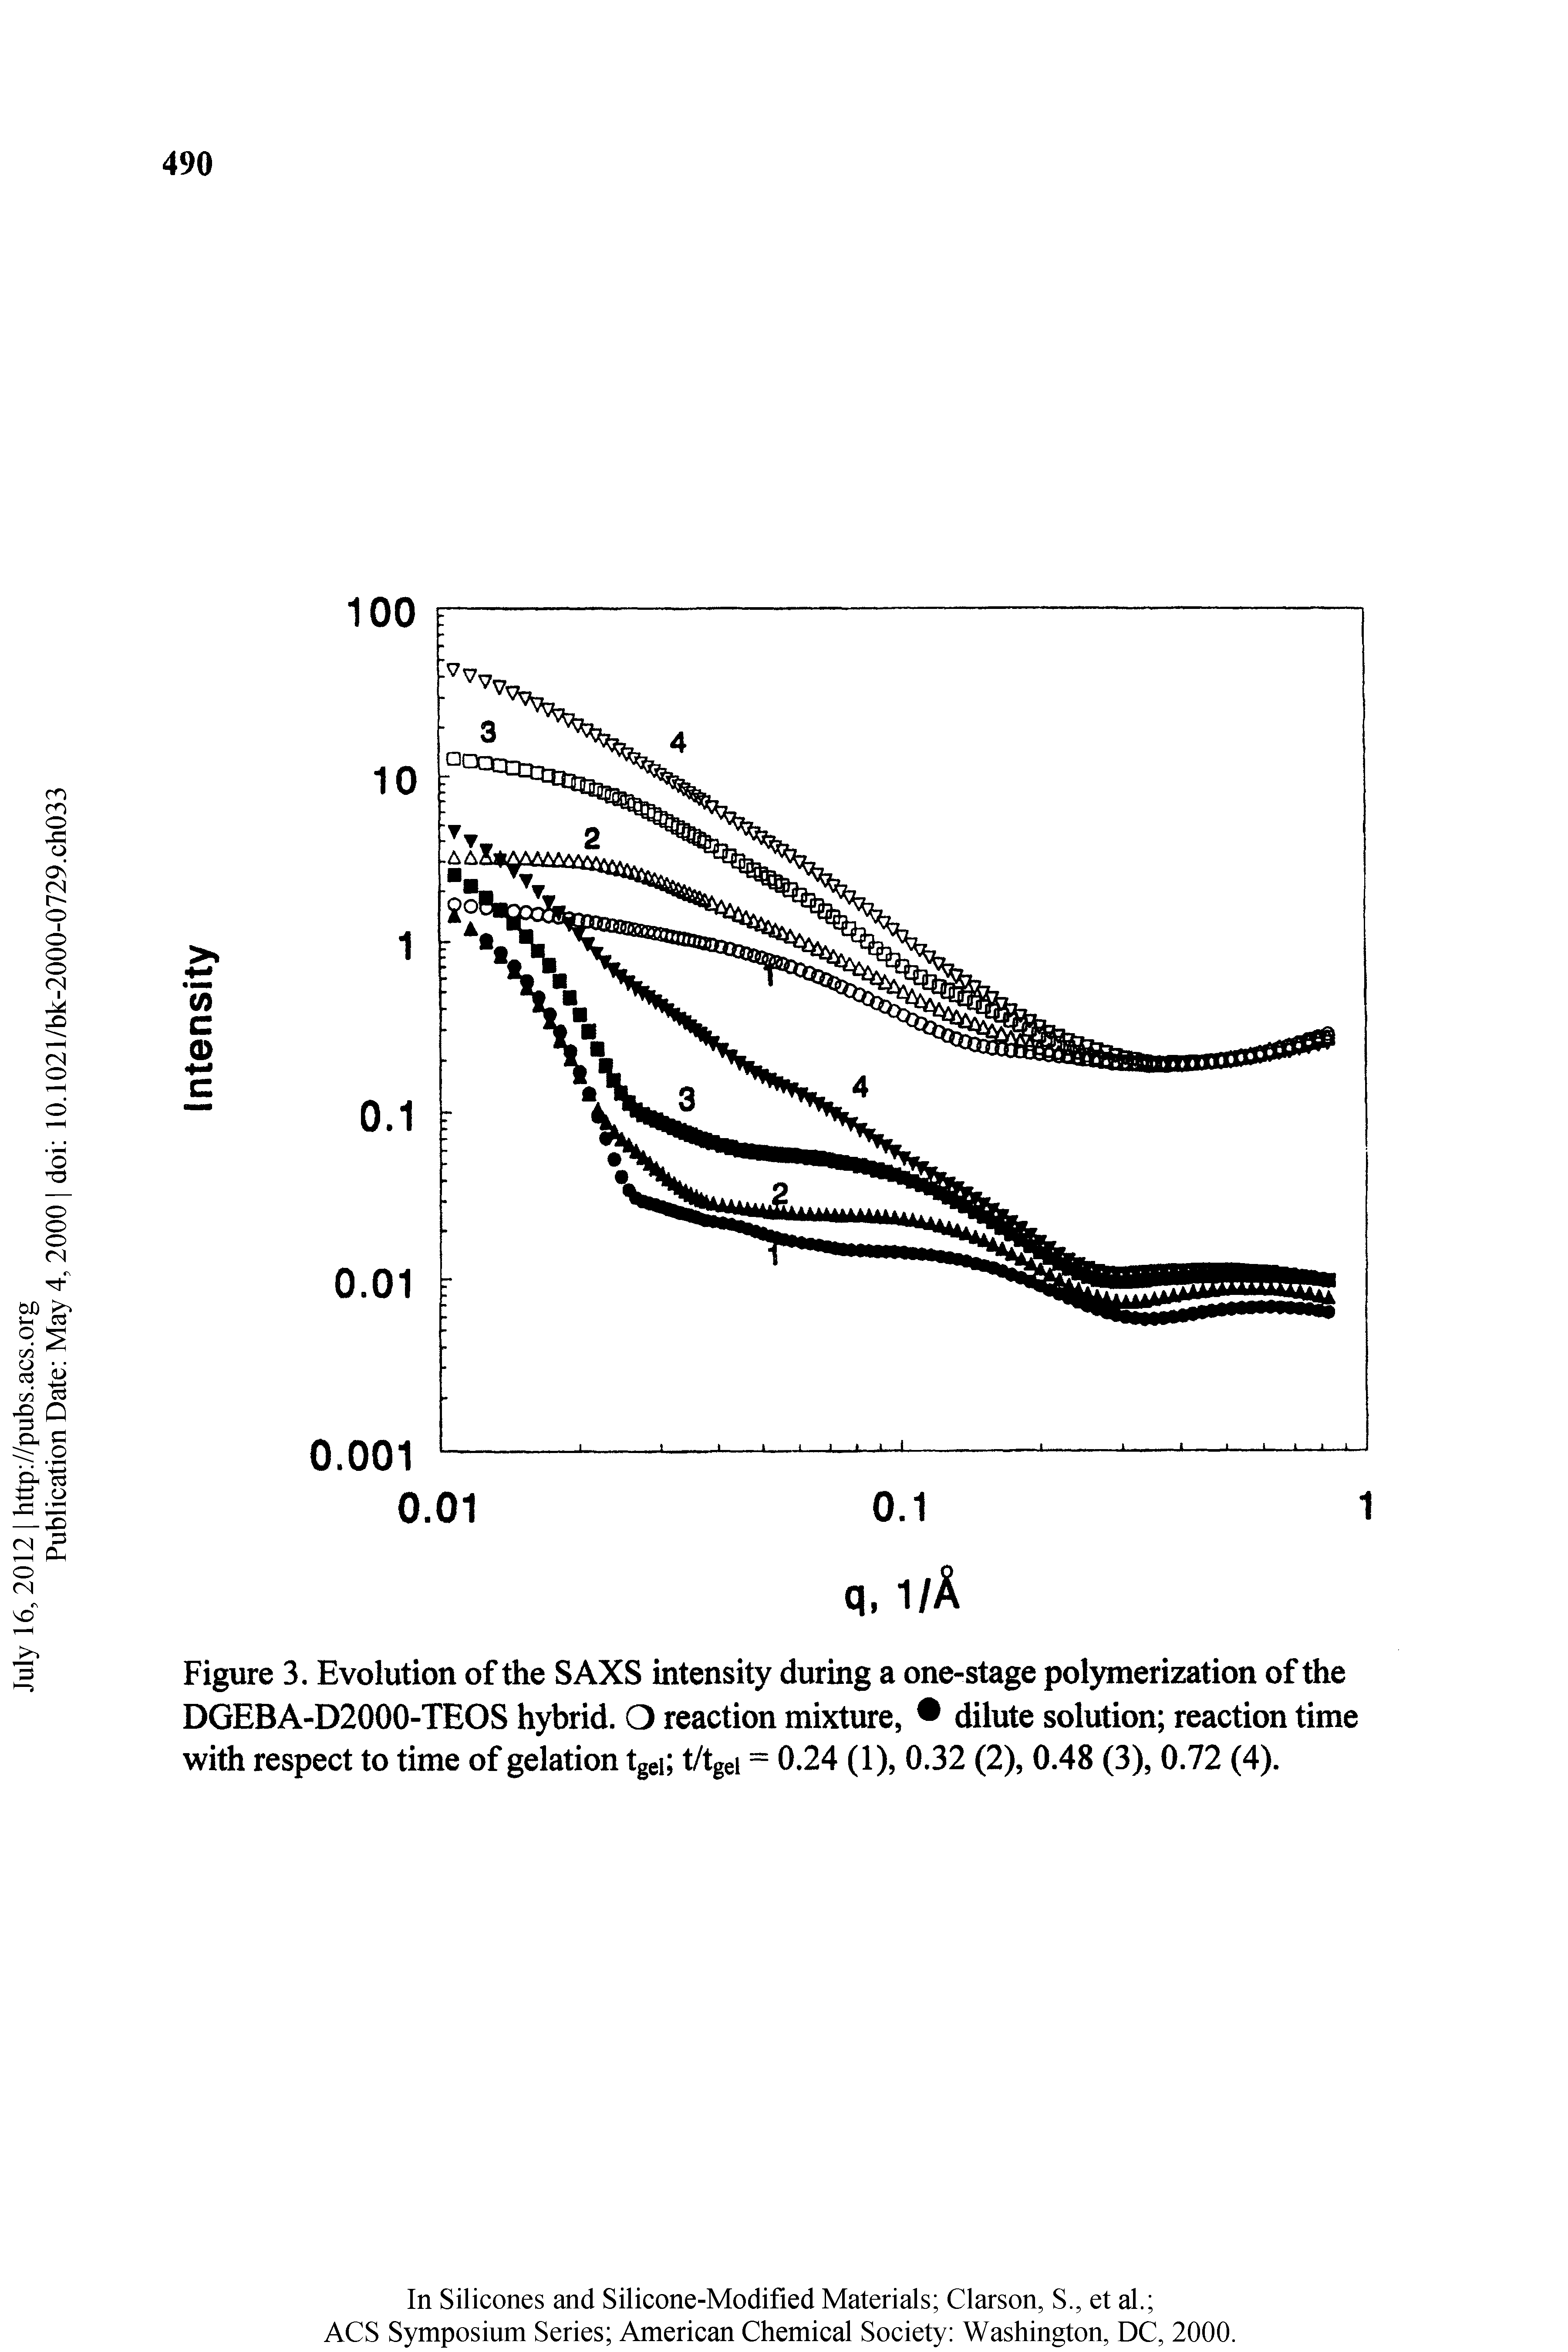 Figure 3. Evolution of the SAXS intensity during a one-stage polymerization of the DGEBA-D2000-TEOS hybrid. O reaction mixture, dilute solution reaction time with respect to time of gelation tgei t/tgei = 0.24 (1), 0.32 (2), 0.48 (3), 0.72 (4).